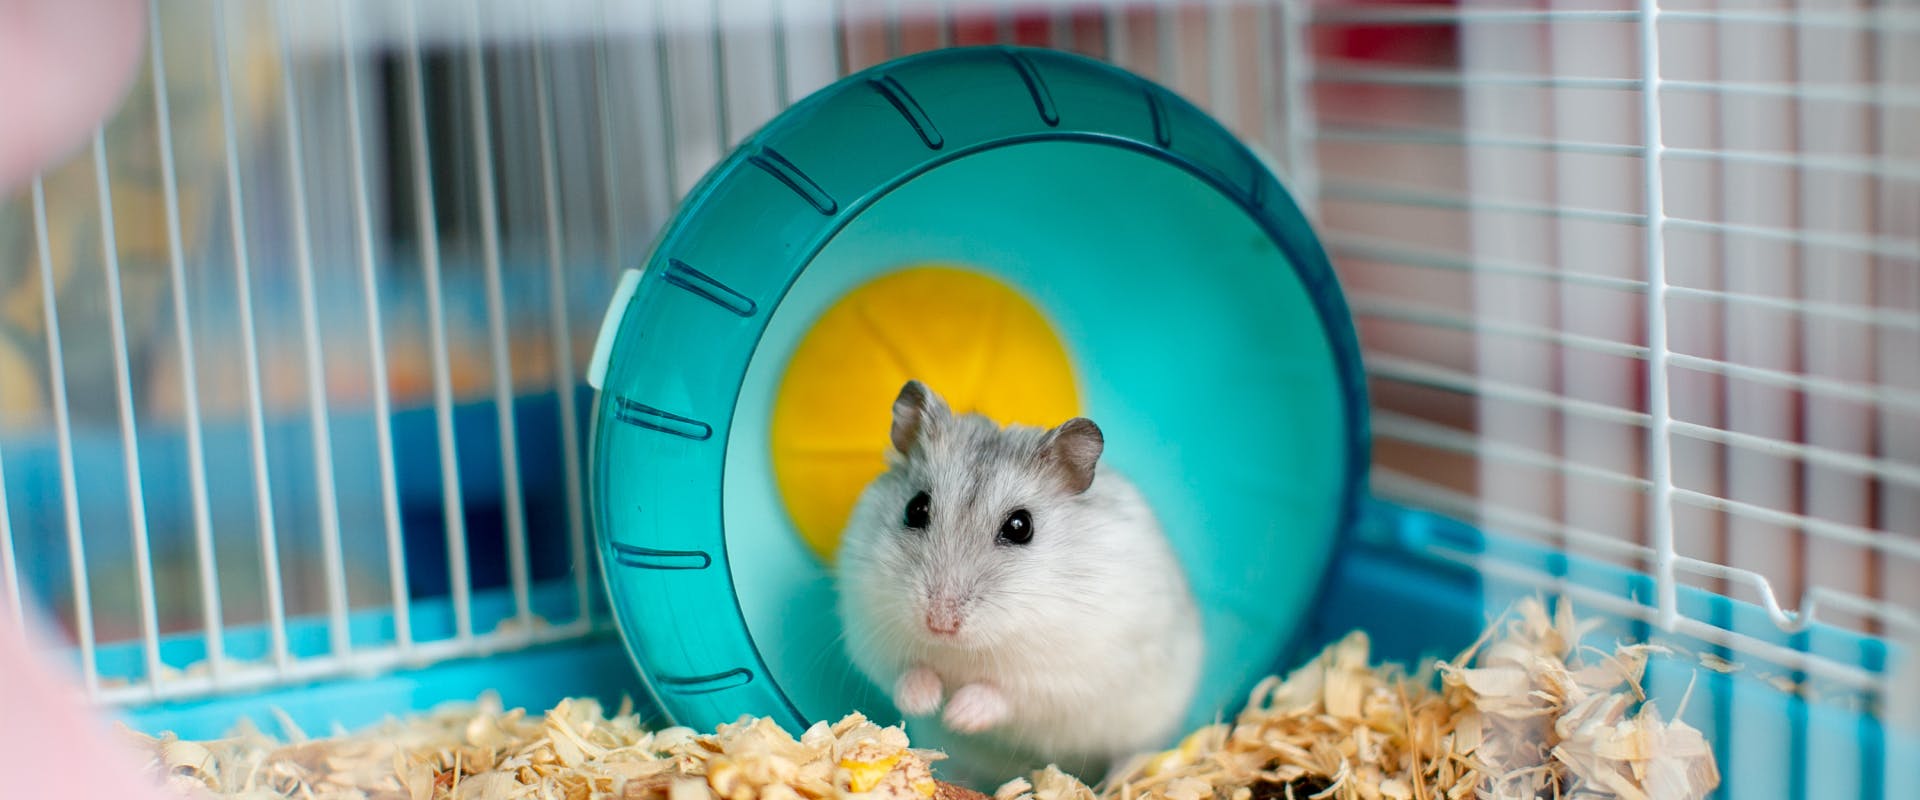 a gray and white hamster squatting on its back legs inside a plastic blue hamster wheel